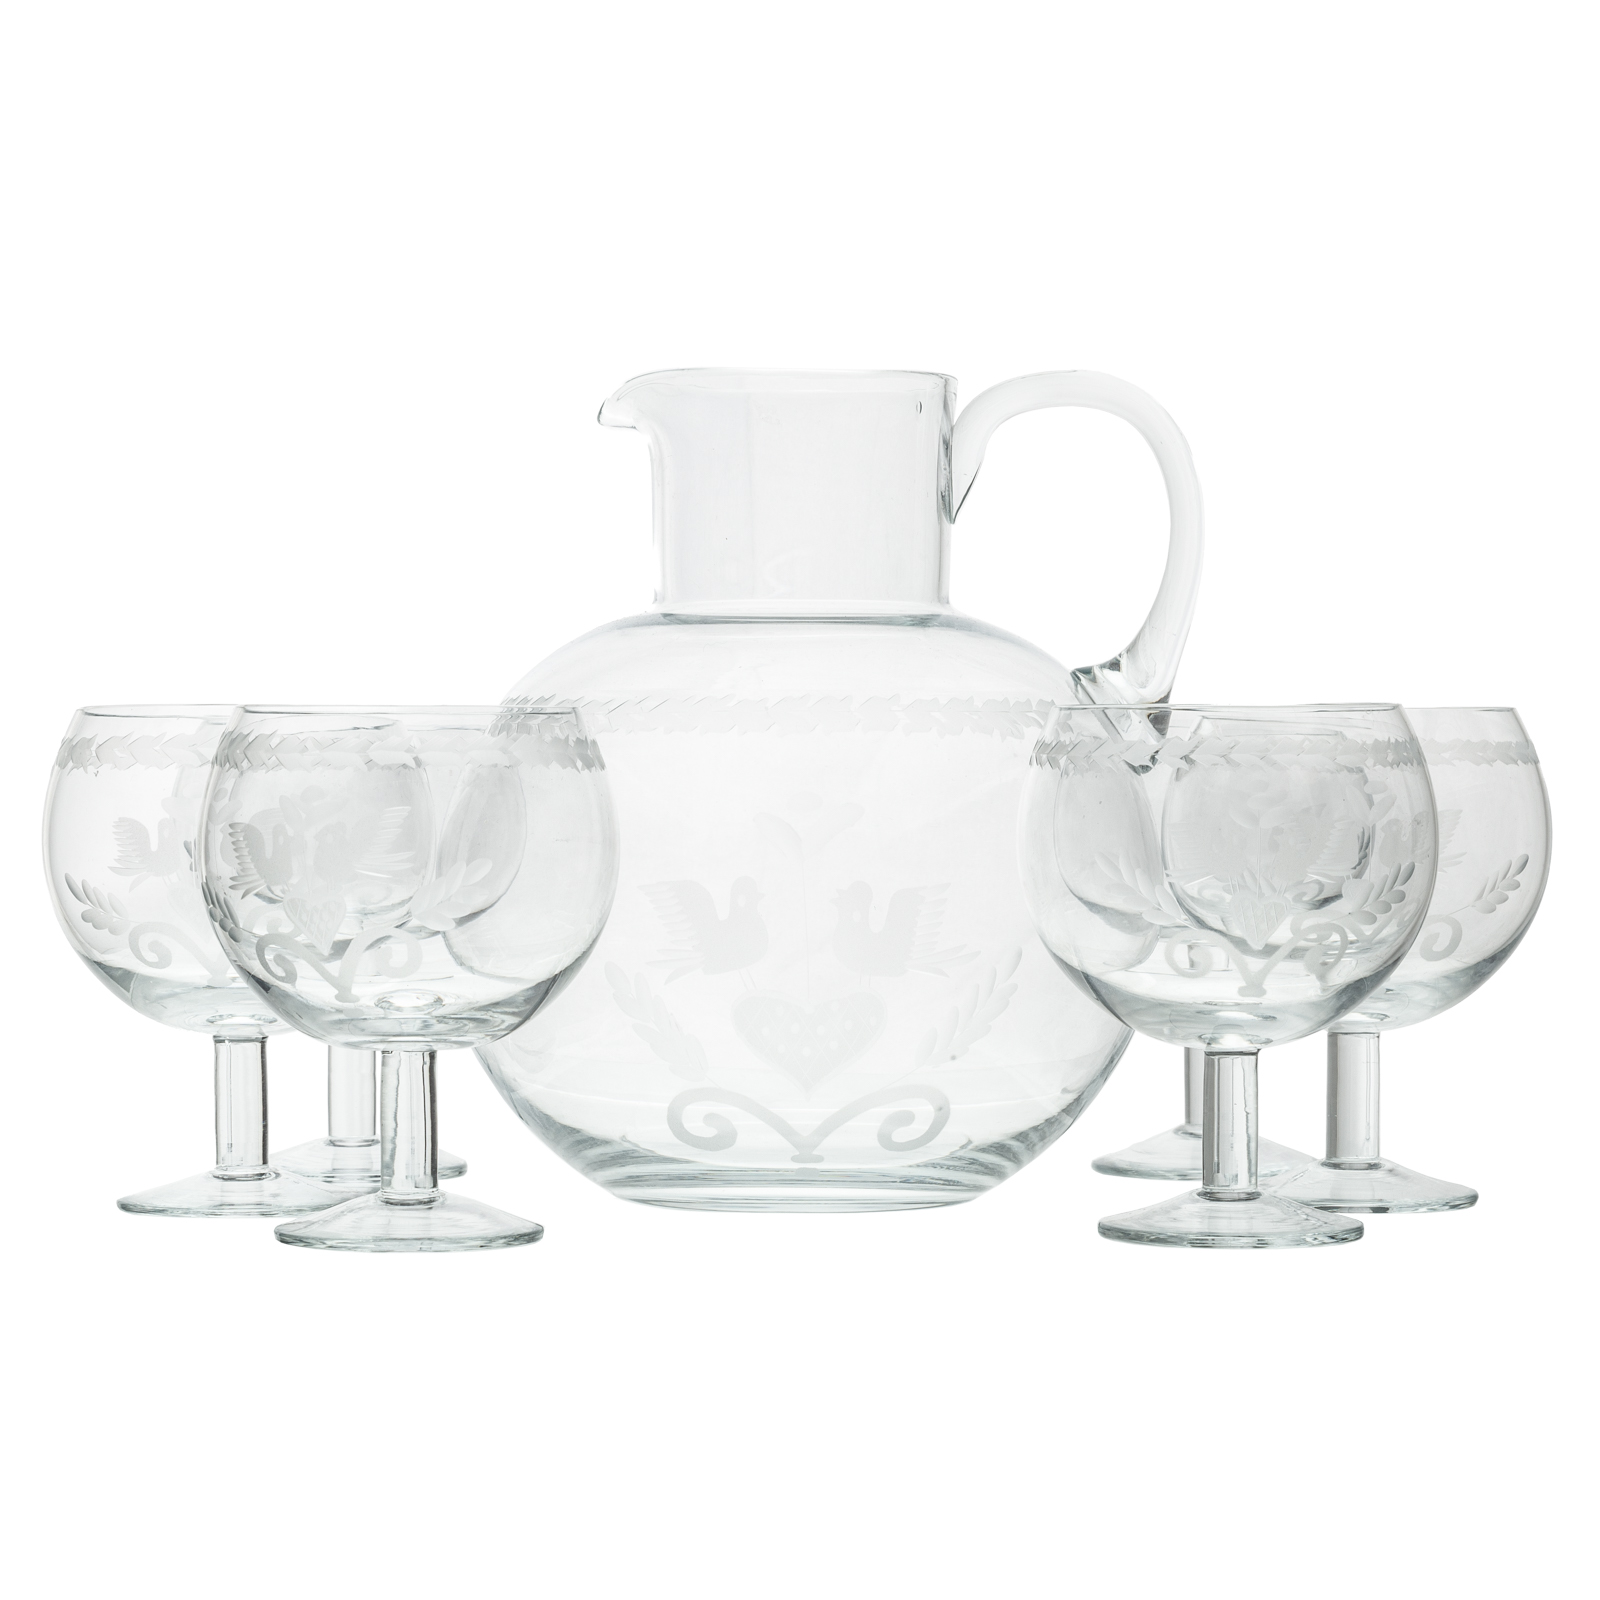 TIFFANY ETCHED GLASS SEVEN-PIECE COLD